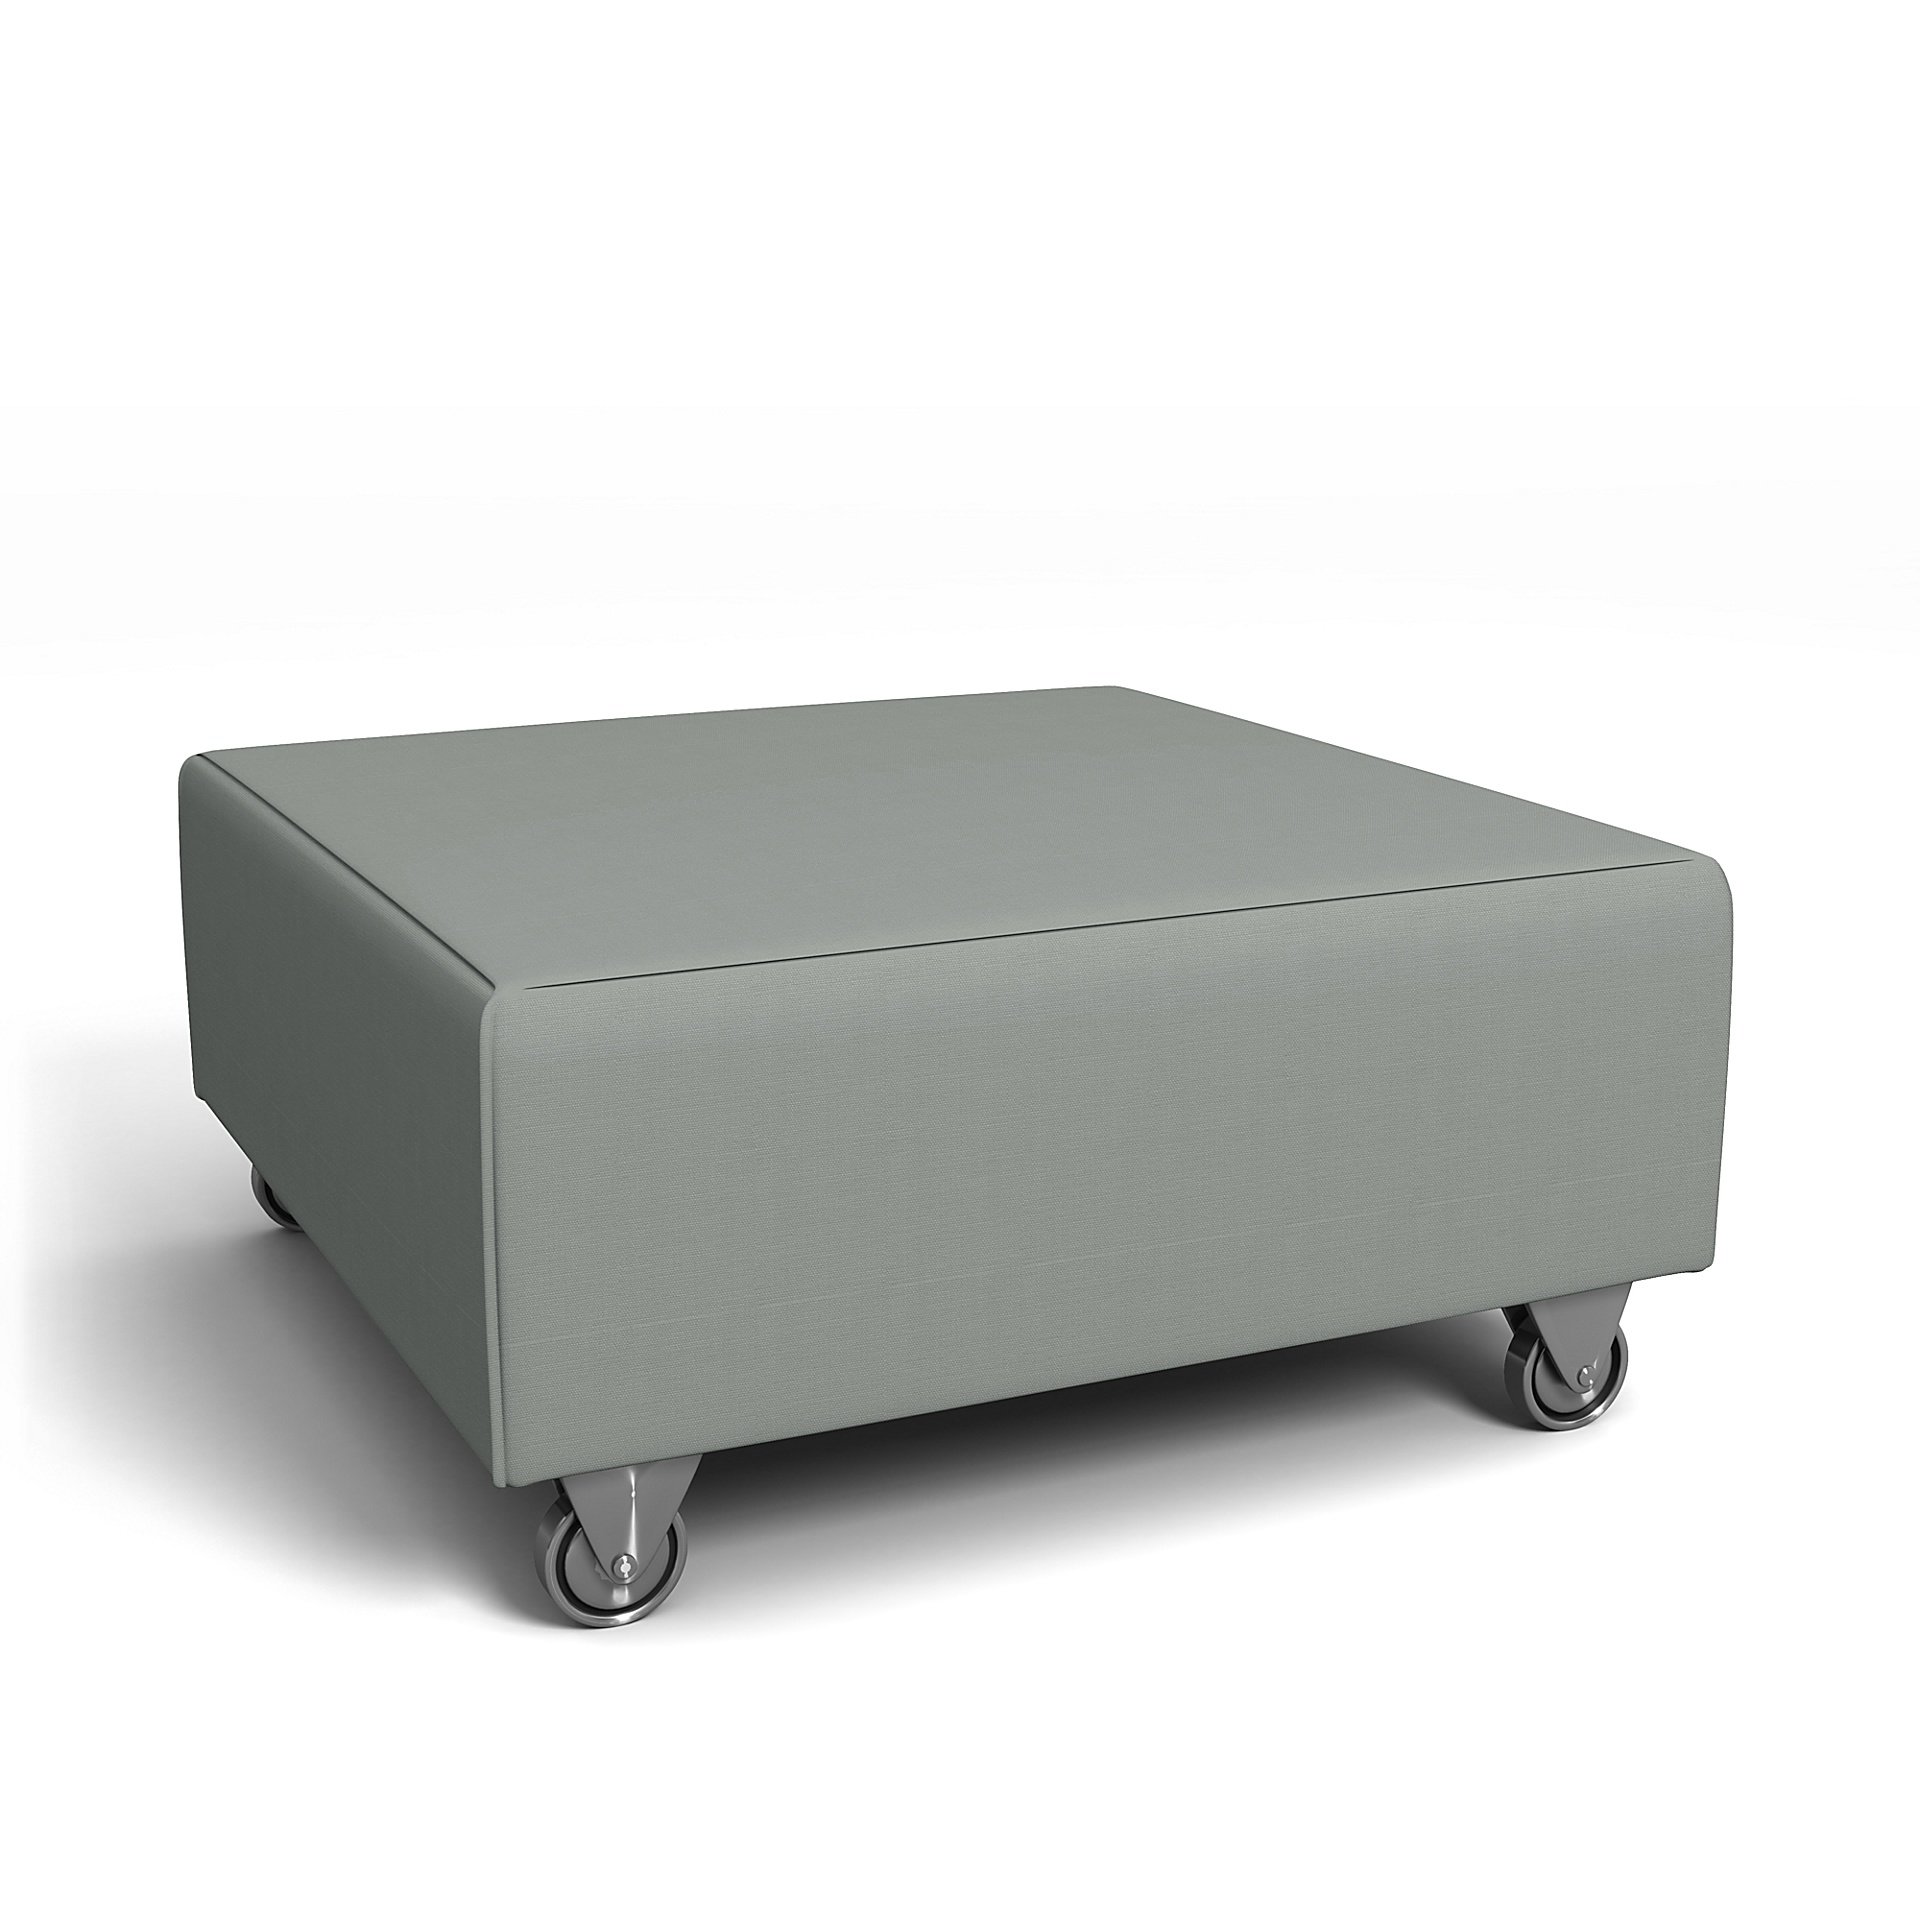 IKEA - Falsterbo Footstool Cover, Drizzle, Cotton - Bemz